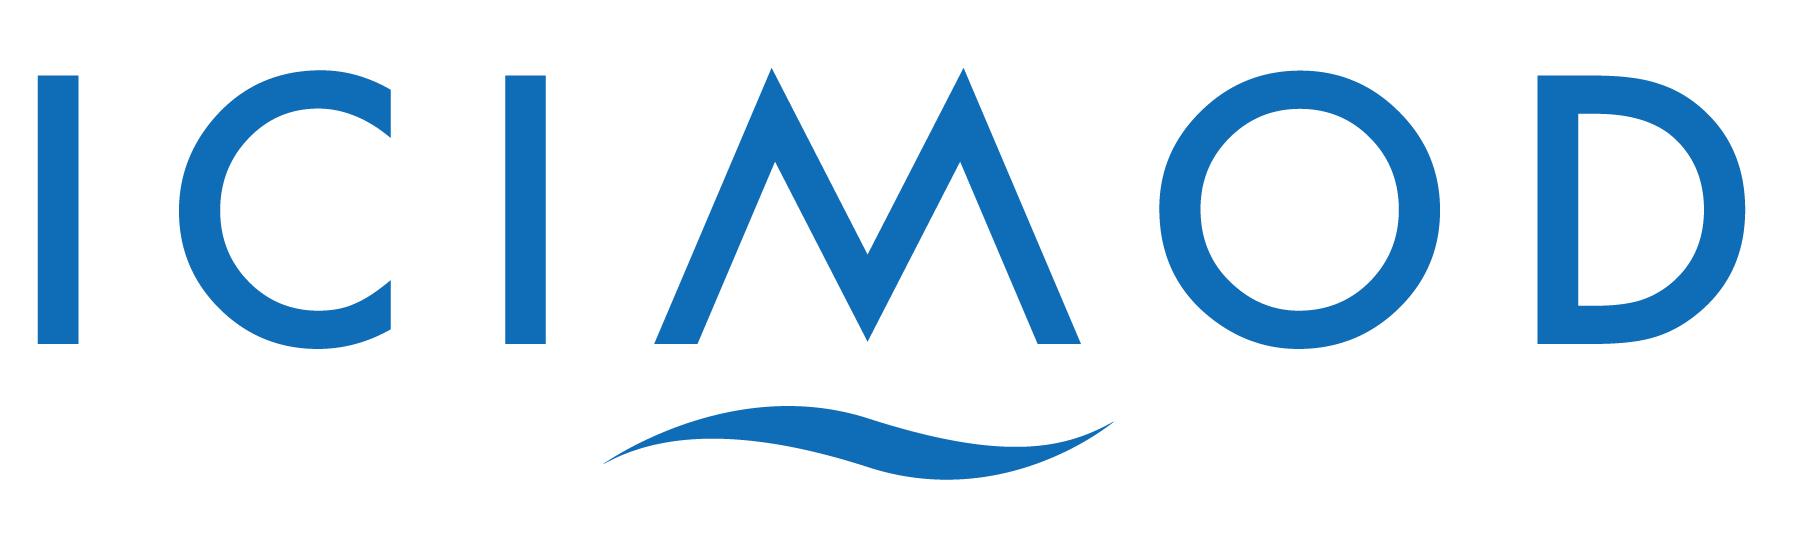 ICIMOD in capital blue letters with a wave under